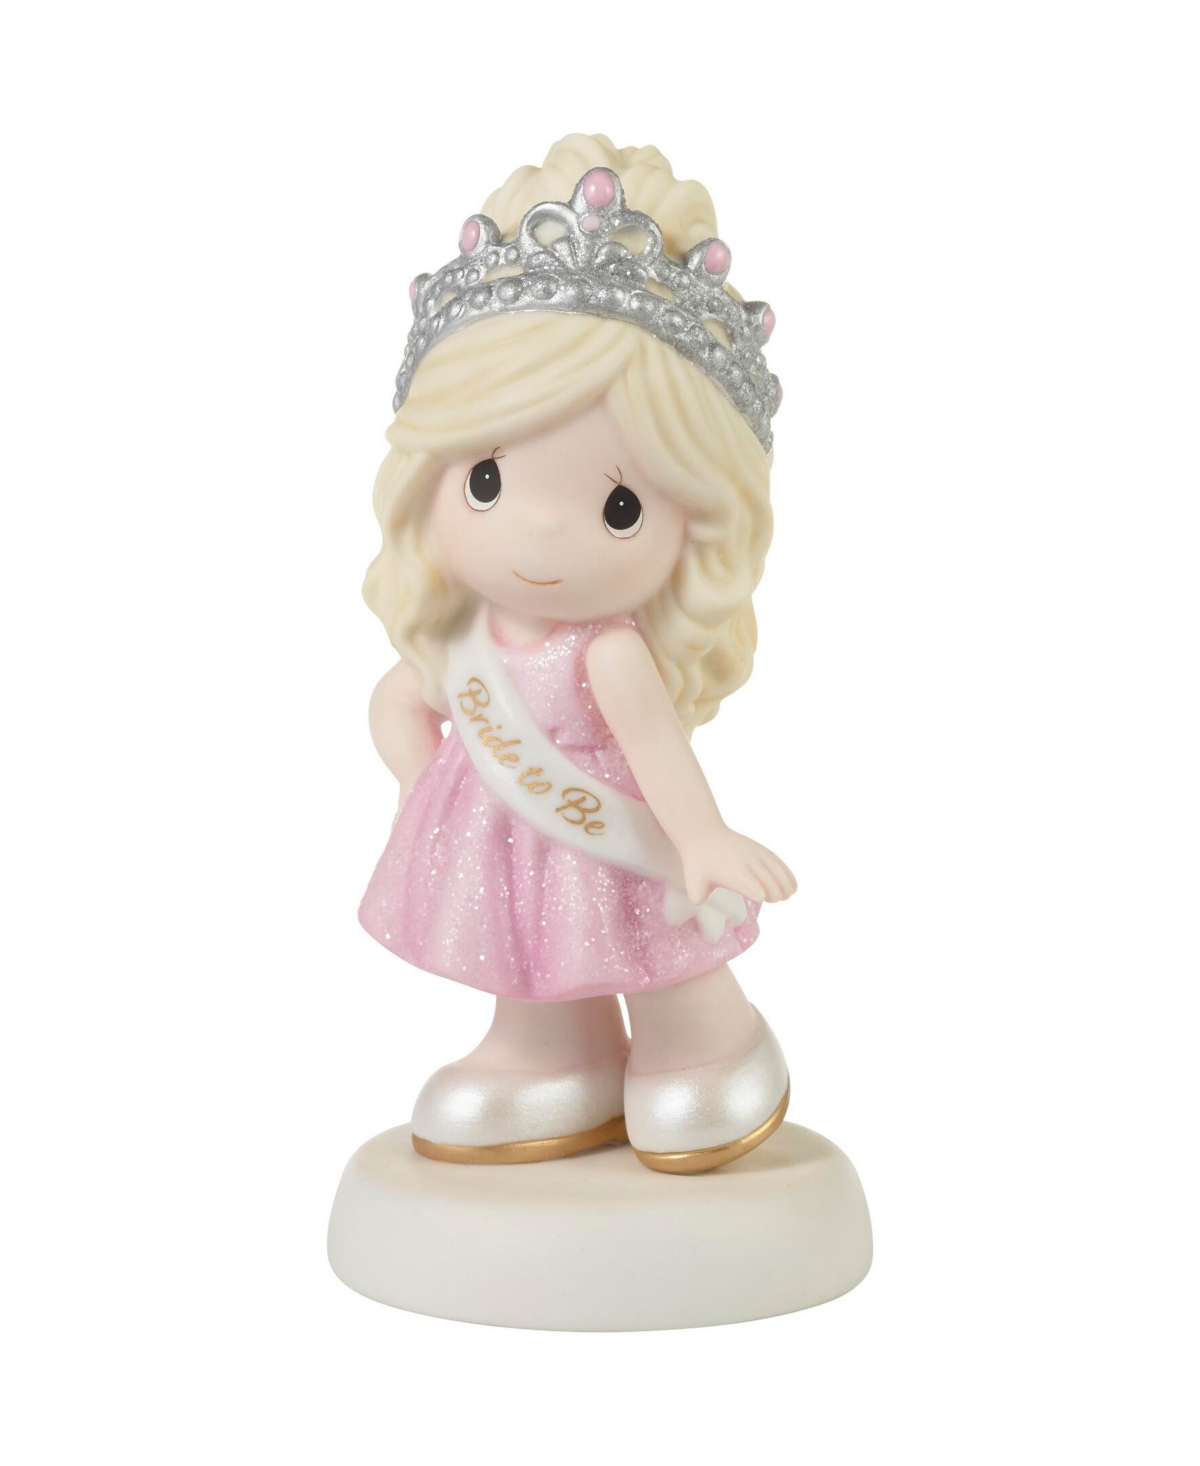 Precious Moments Bride To Be Bisque Porcelain Figurine In Multicolored